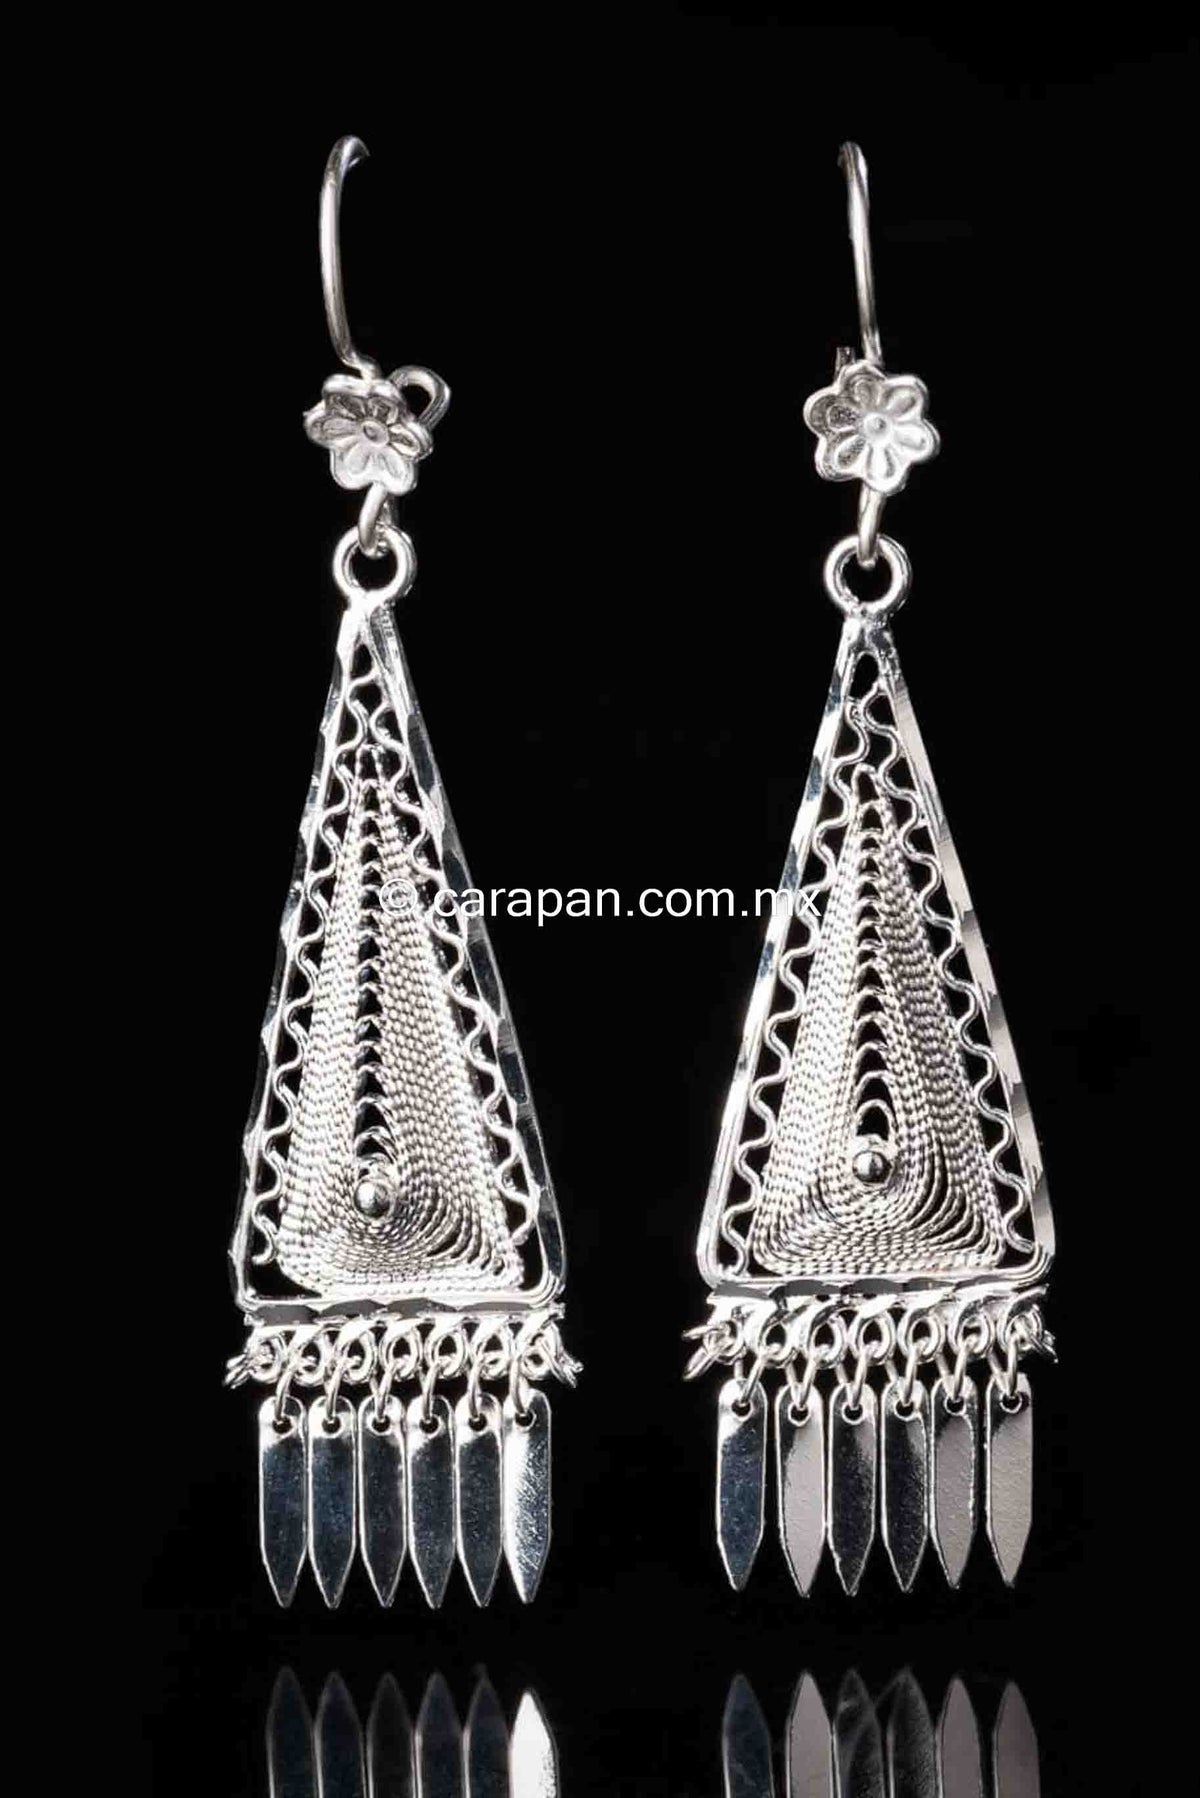 Mexican Silver Pyramid filigree earring with spear fringe